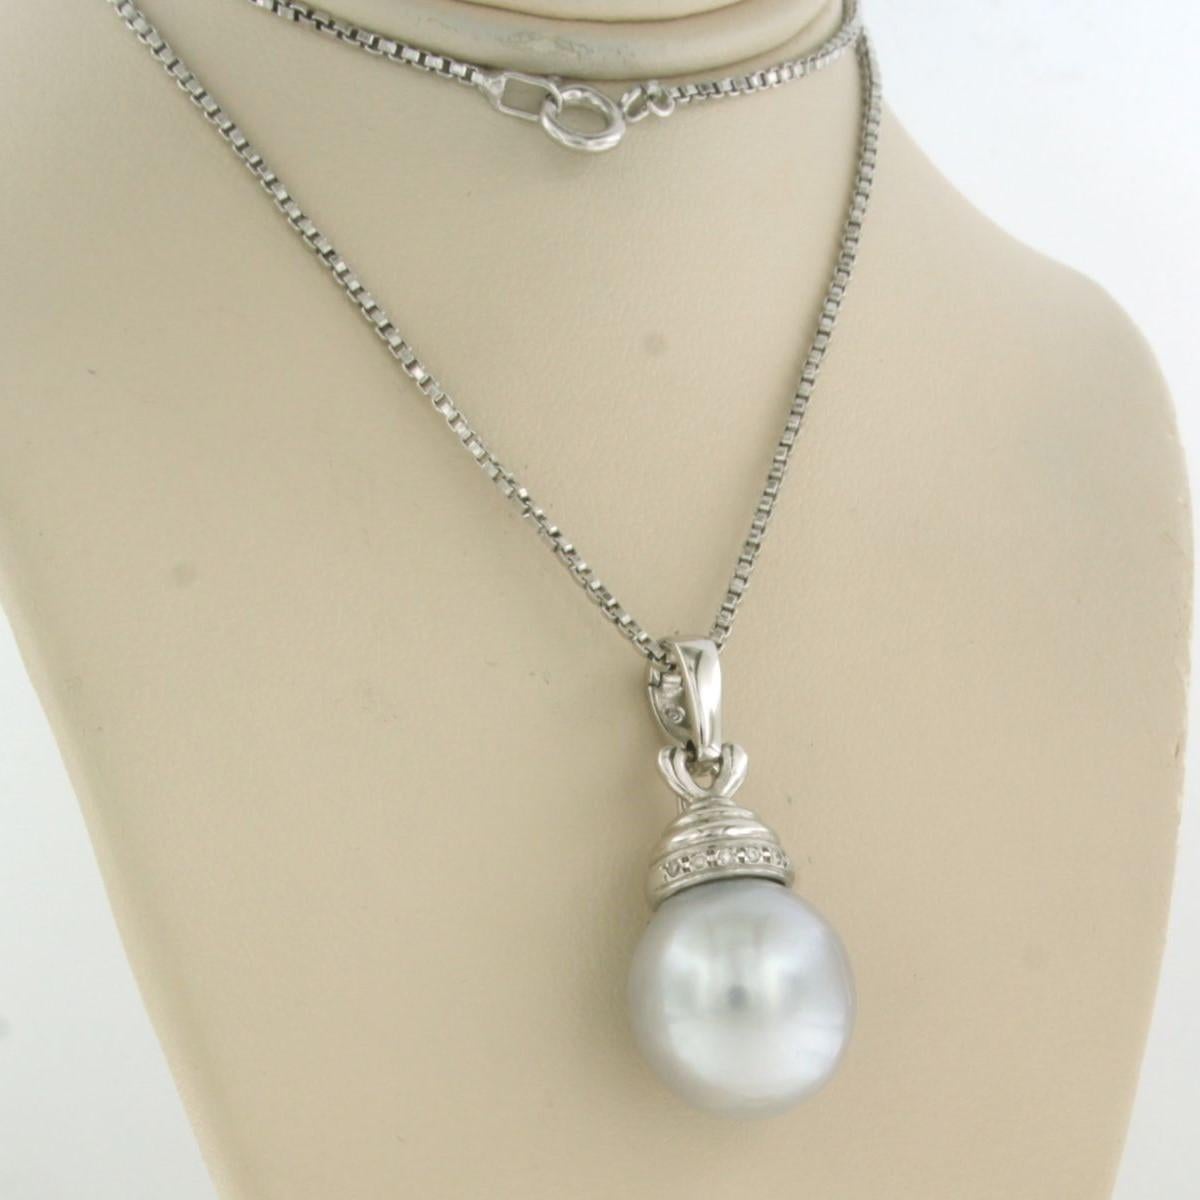 Modern Necklace an d pendant set with pearl and diamonds 18k white gold